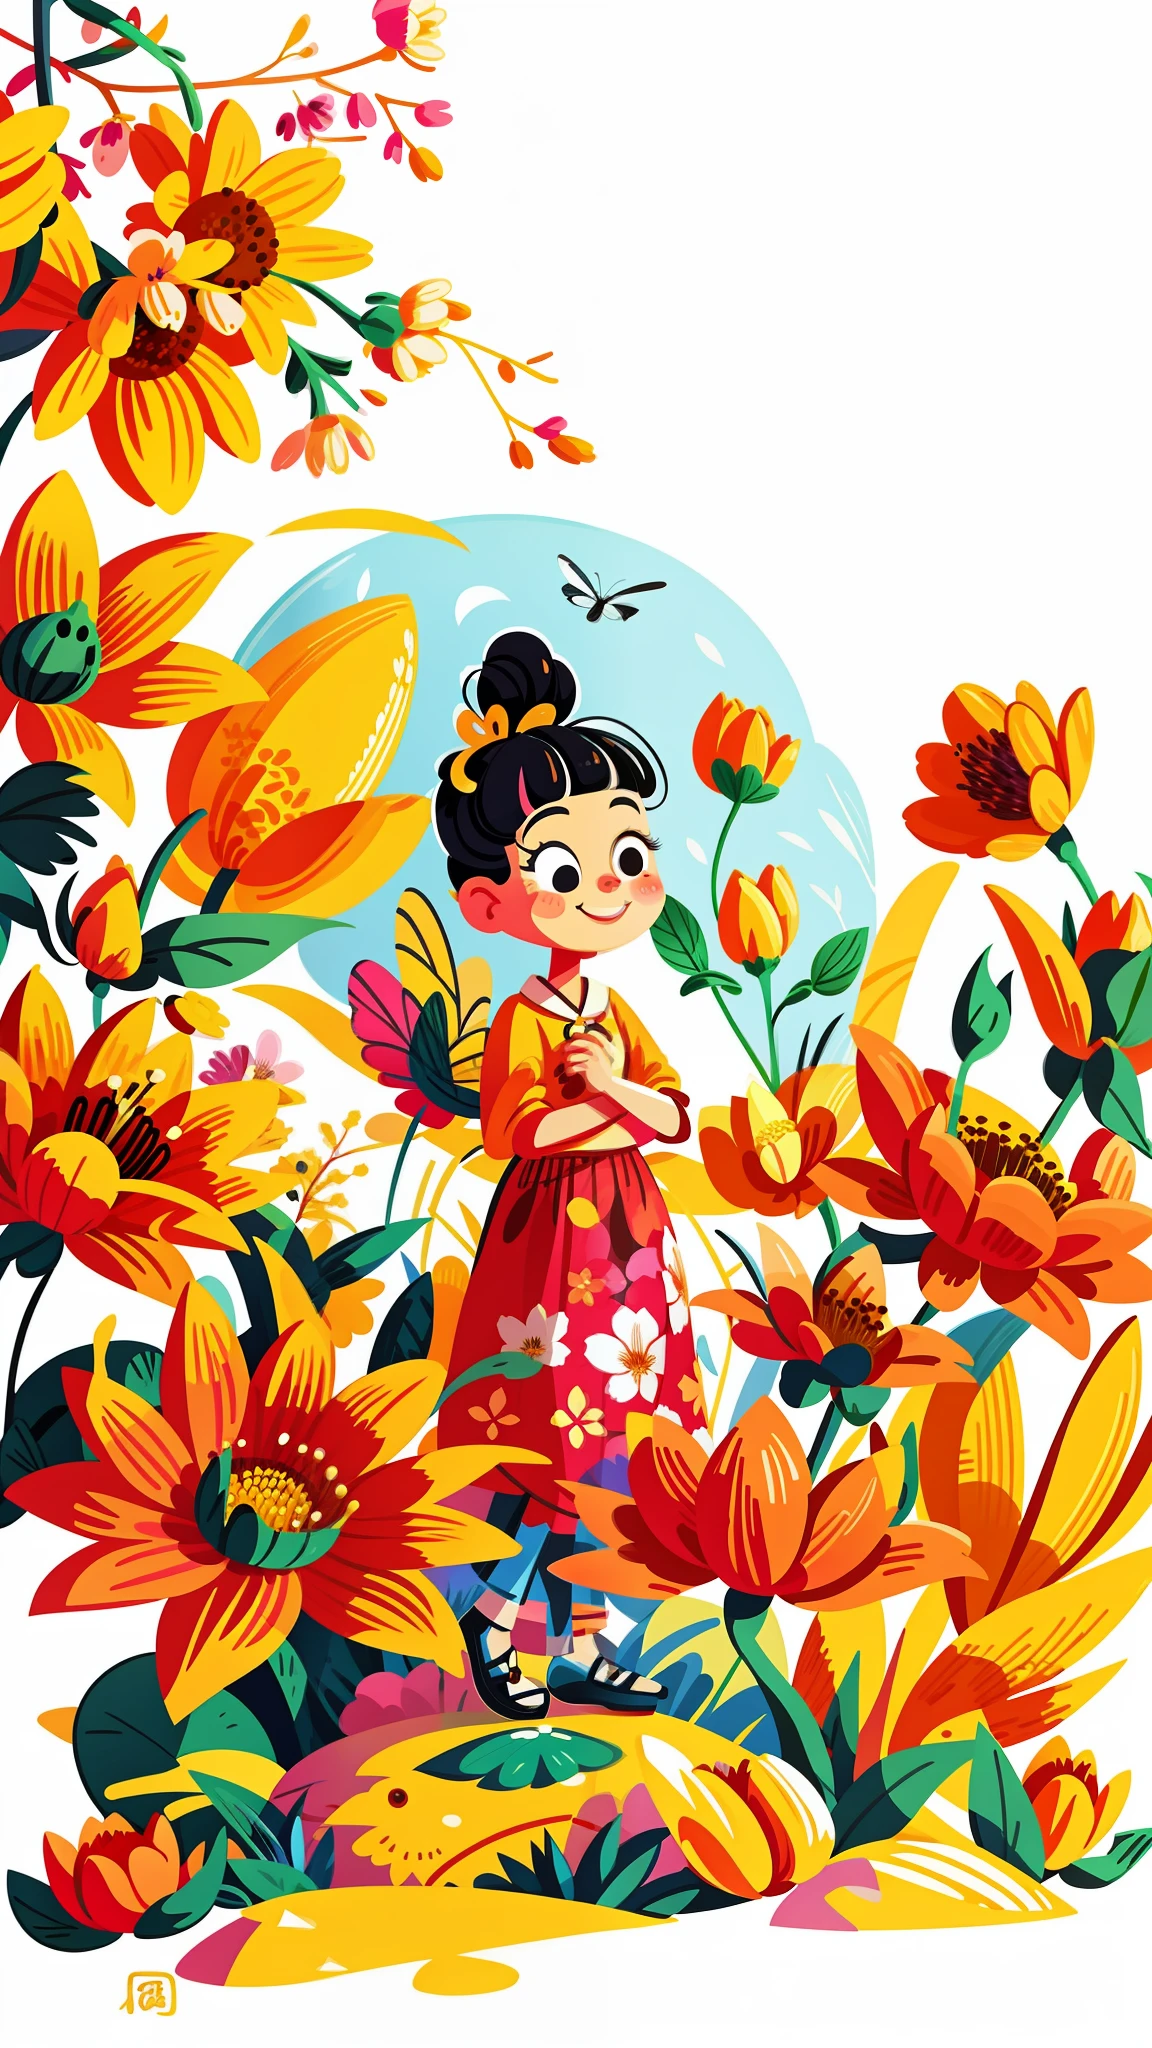 close-up of a cartoon girl, cute girl, girl is very happy, smiling, kawaii, big eyes, spring scene, spring, flowers, meadow, warm sun, delicate face, fairy tale style, beautiful sky, wearing a beautiful dress, super high detail, super high resolution, award-winning work, masterpiece, lo-fi illustration style, flat illustration, cute illustration, yellow pink red flowers around, digital illustration style, fantastic, beautiful artwork illustration, high quality detail art, beautiful scene,, Beautiful artwork illustration, hand drawn cartoon art style, painting illustration, simple and clean illustration, inspired by Ma Yuanyu, Yang J, inspired by Cui Bai, inspired by Puhua